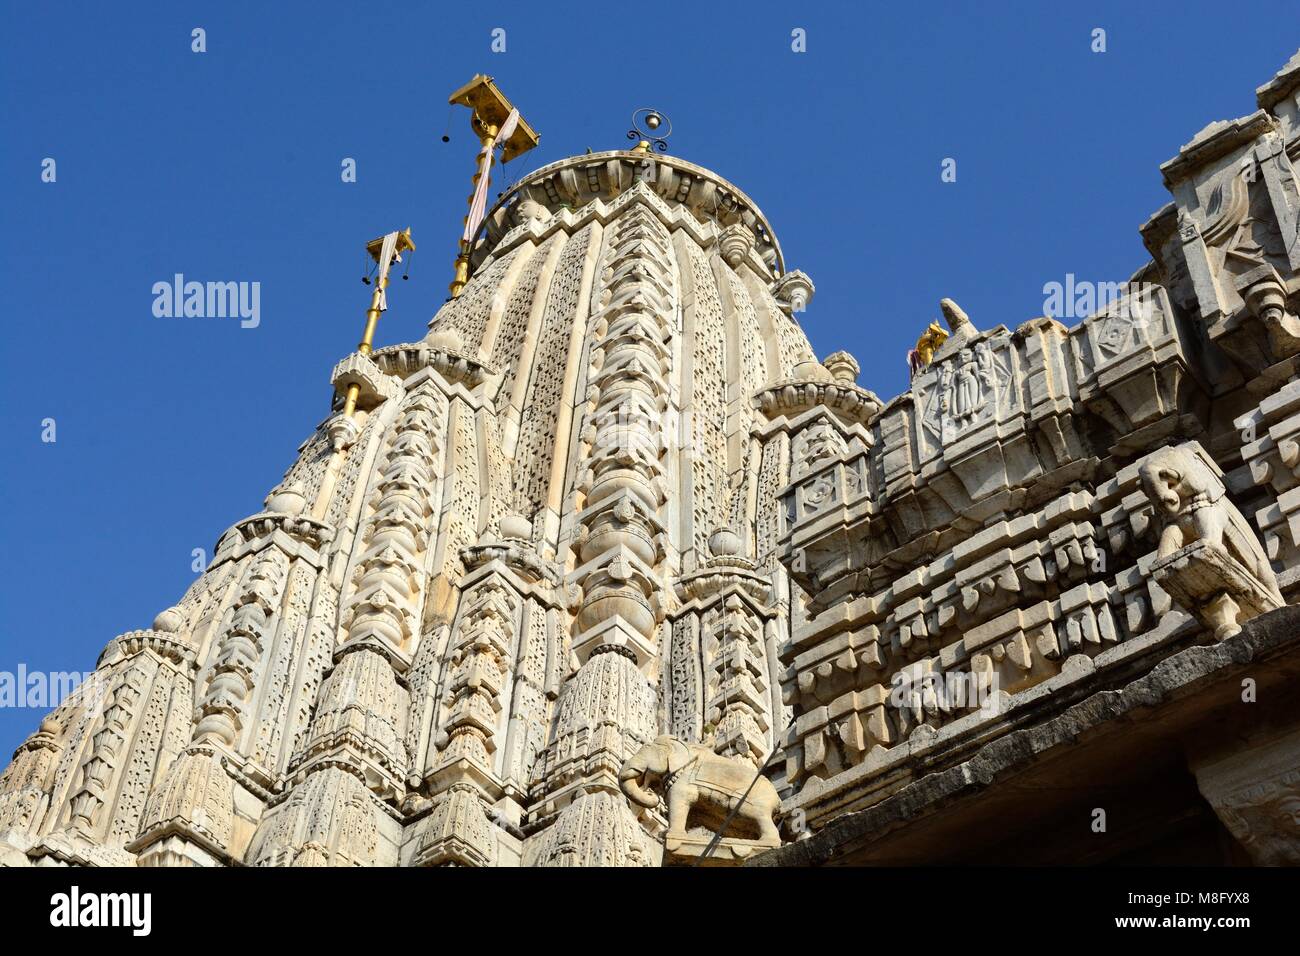 Jagdish Mandir exterior a large ornately carved Hindu Temple Devoted to Lord Vishnu set in the middle of the old town of Udaipur Rajashan India Stock Photo